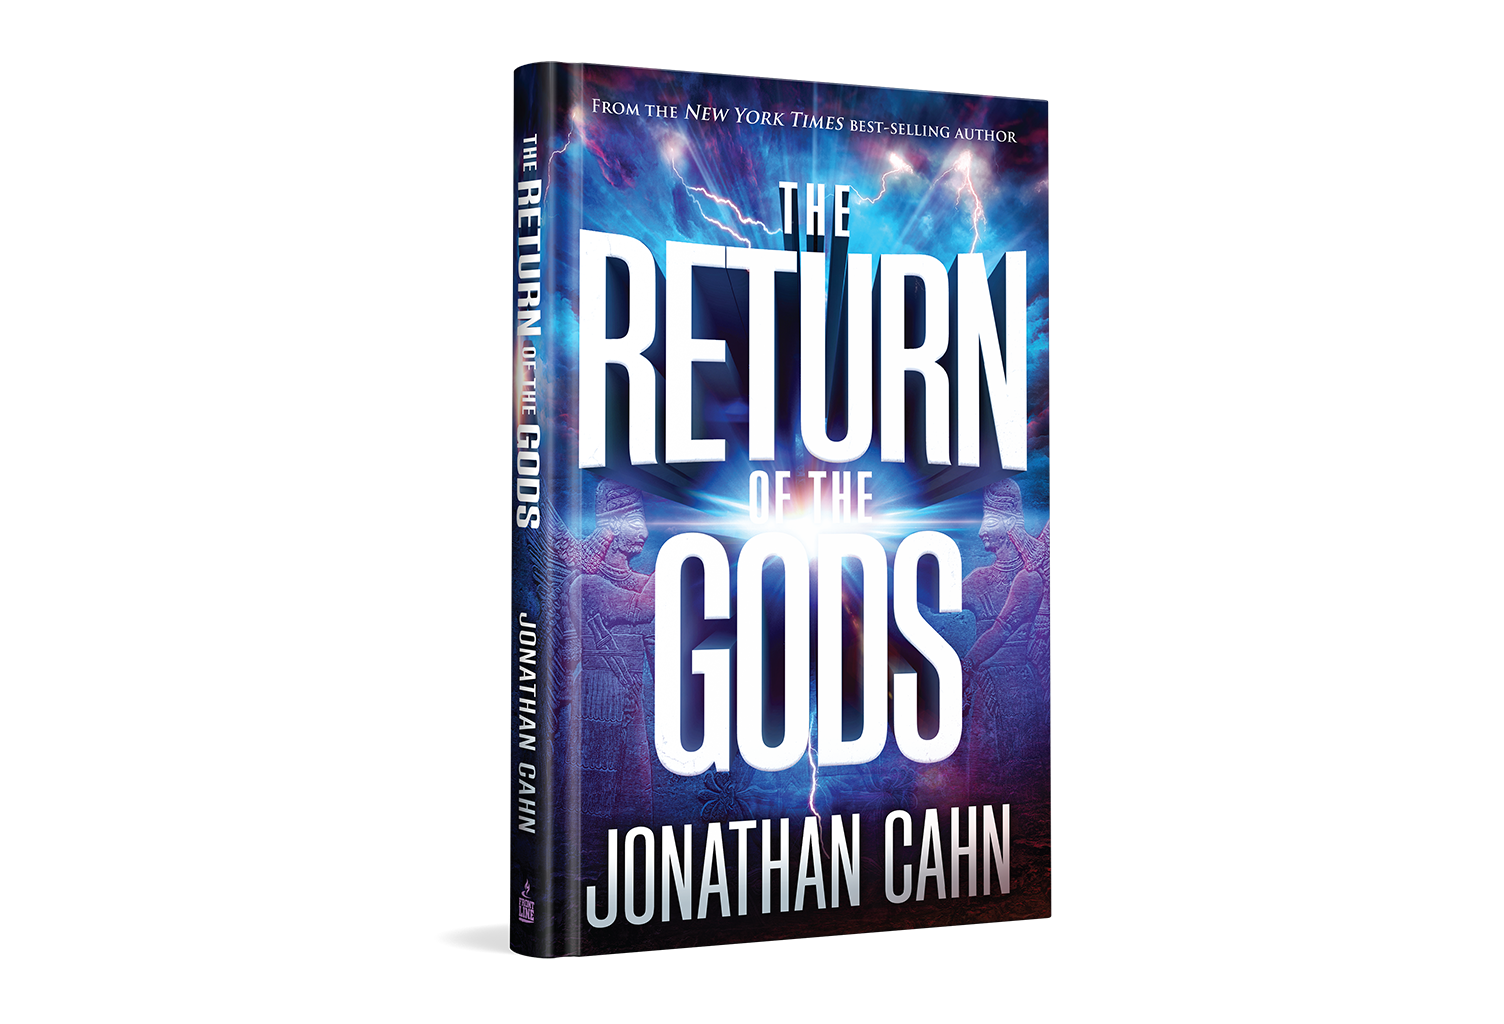 The Return of the Gods book by Jonathan Cahn on TBN